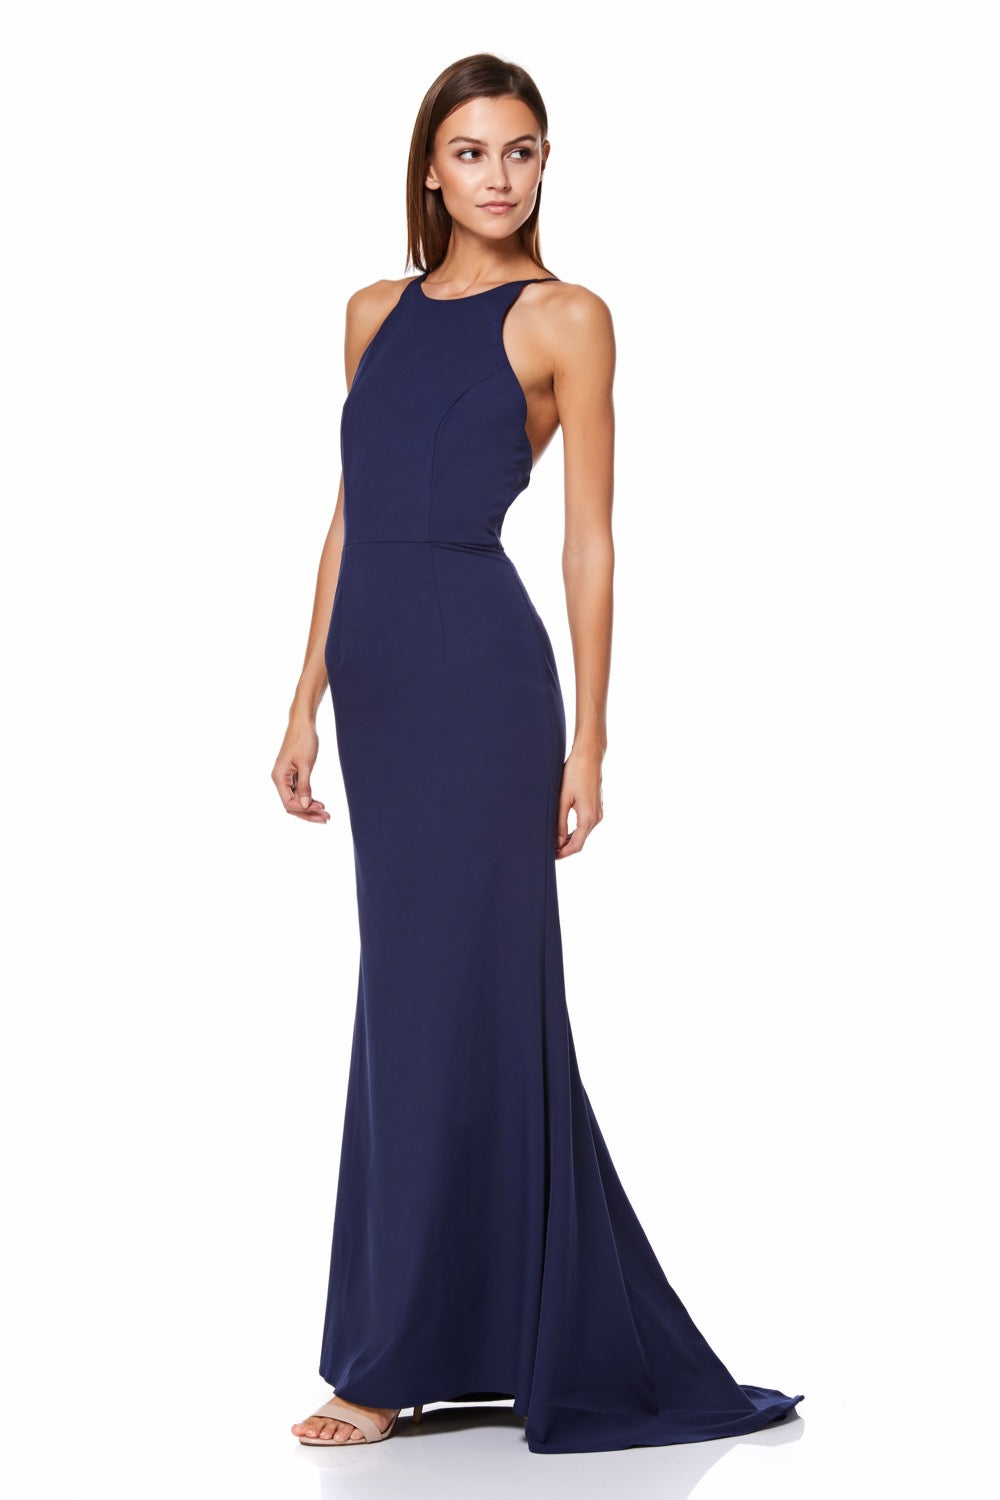 Jarlo's Lyssa Fishtail Maxi Dress with Strappy Back Detail in Navy ...